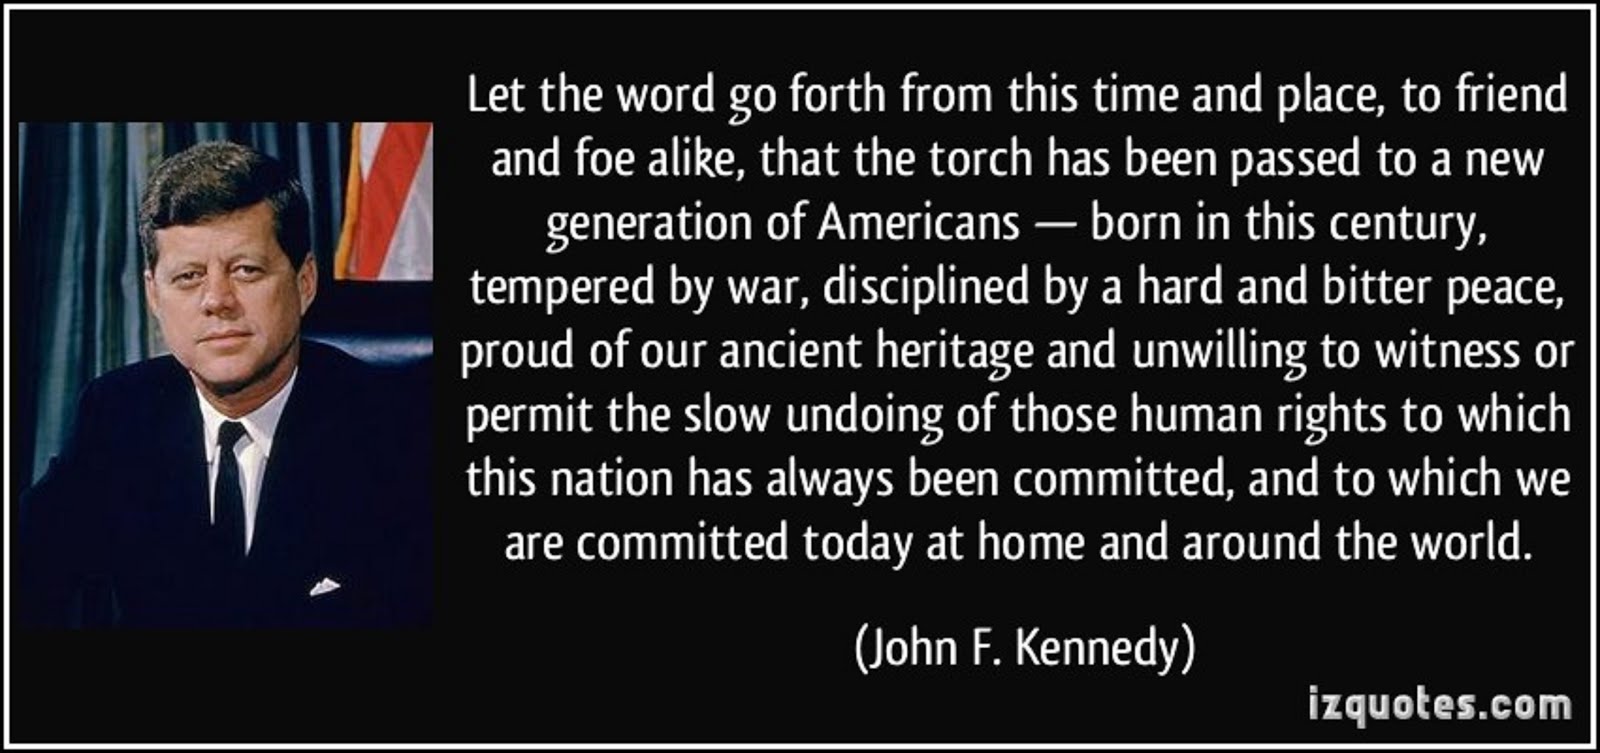 "LET THE WORD GO FORTH"  JFK"